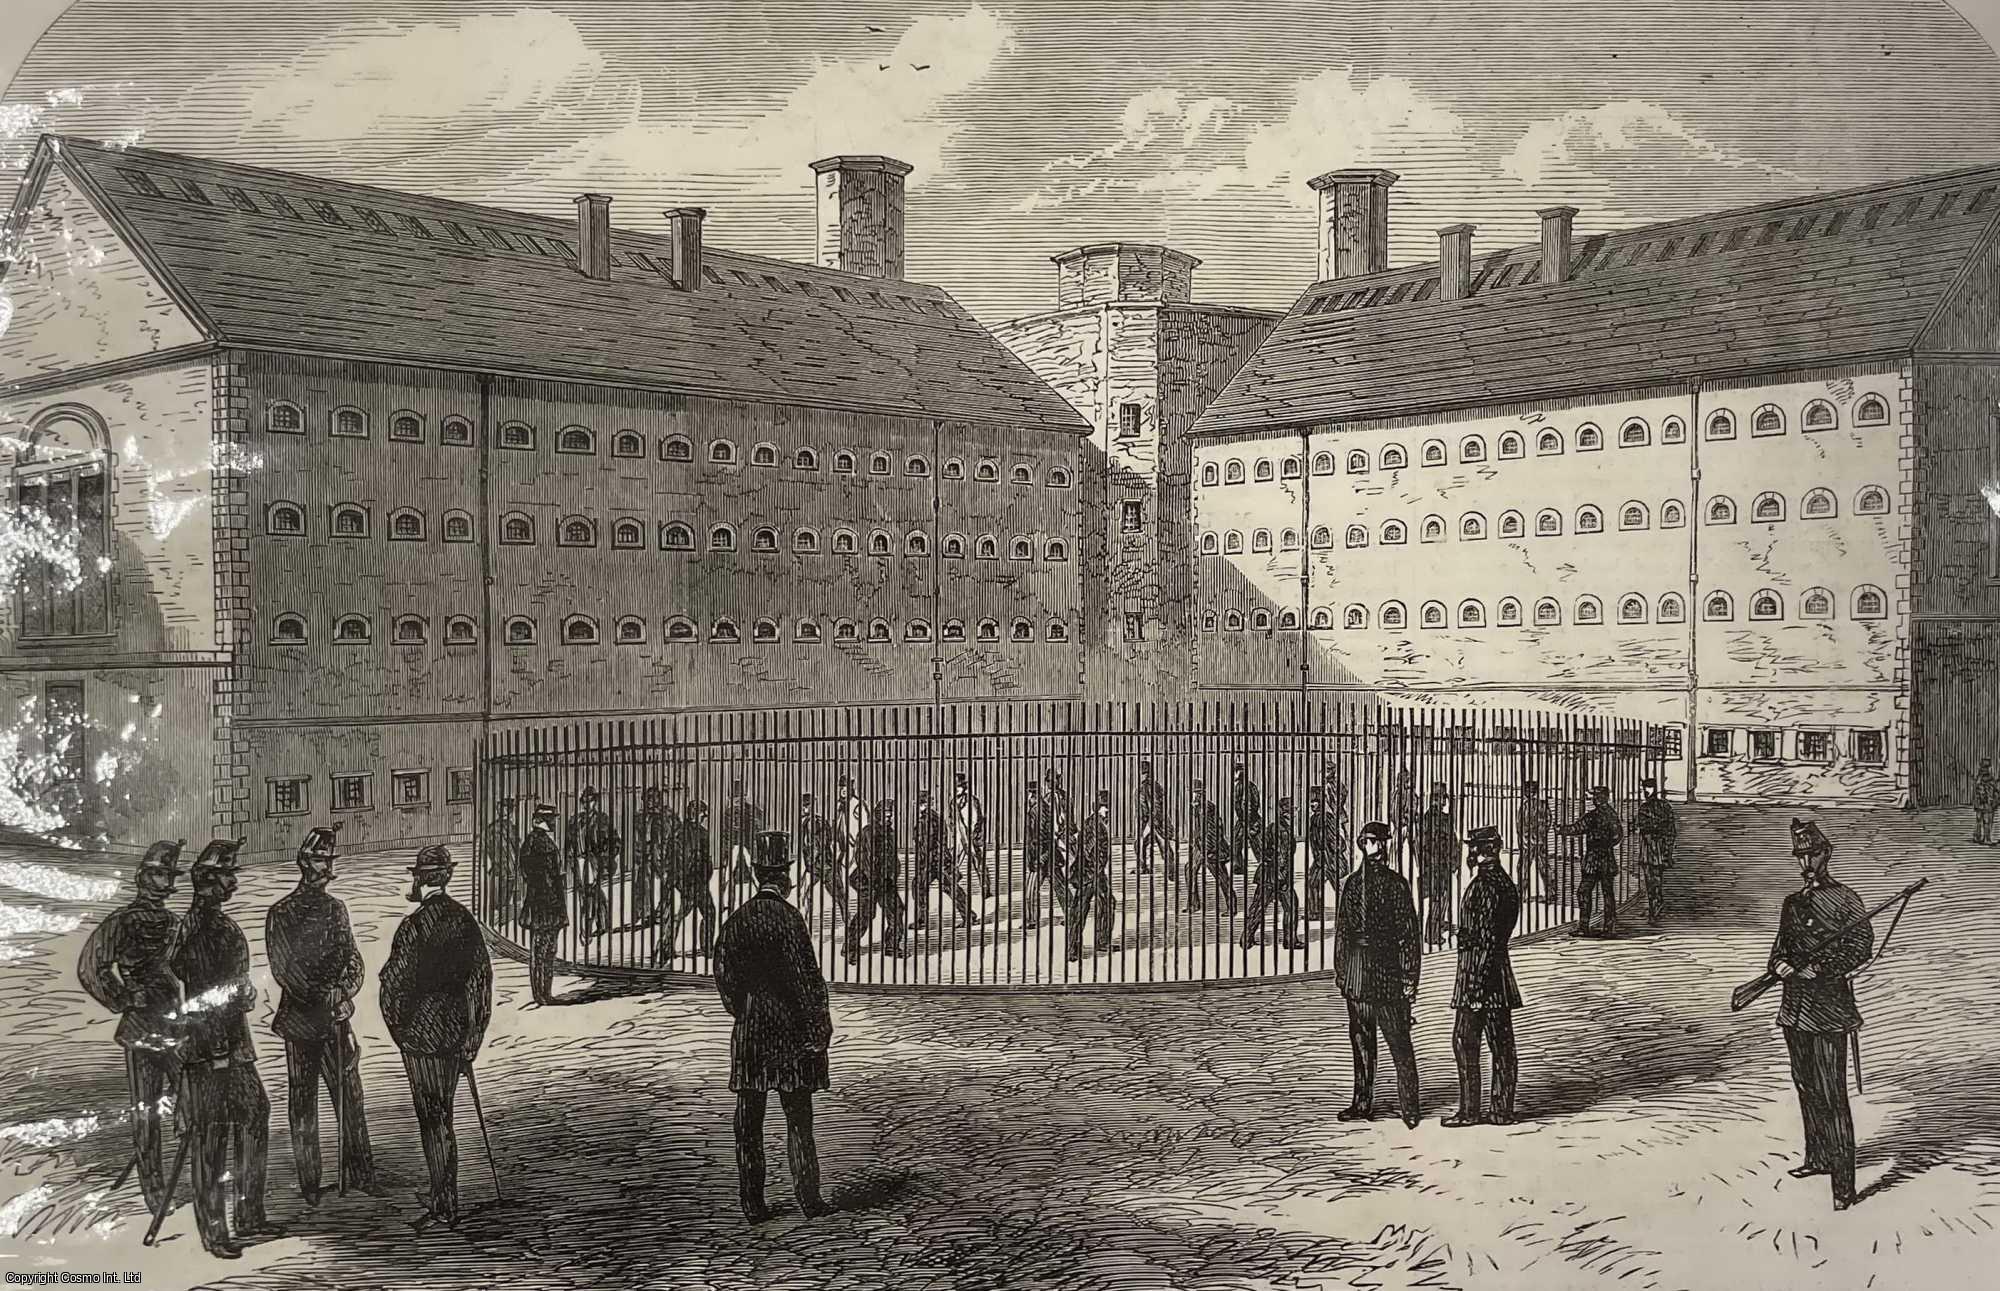 FENIANS - Interior of Mountjoy Prison, Dublin, where the Fenians are Confined. An original print from the Illustrated London News, 1866.